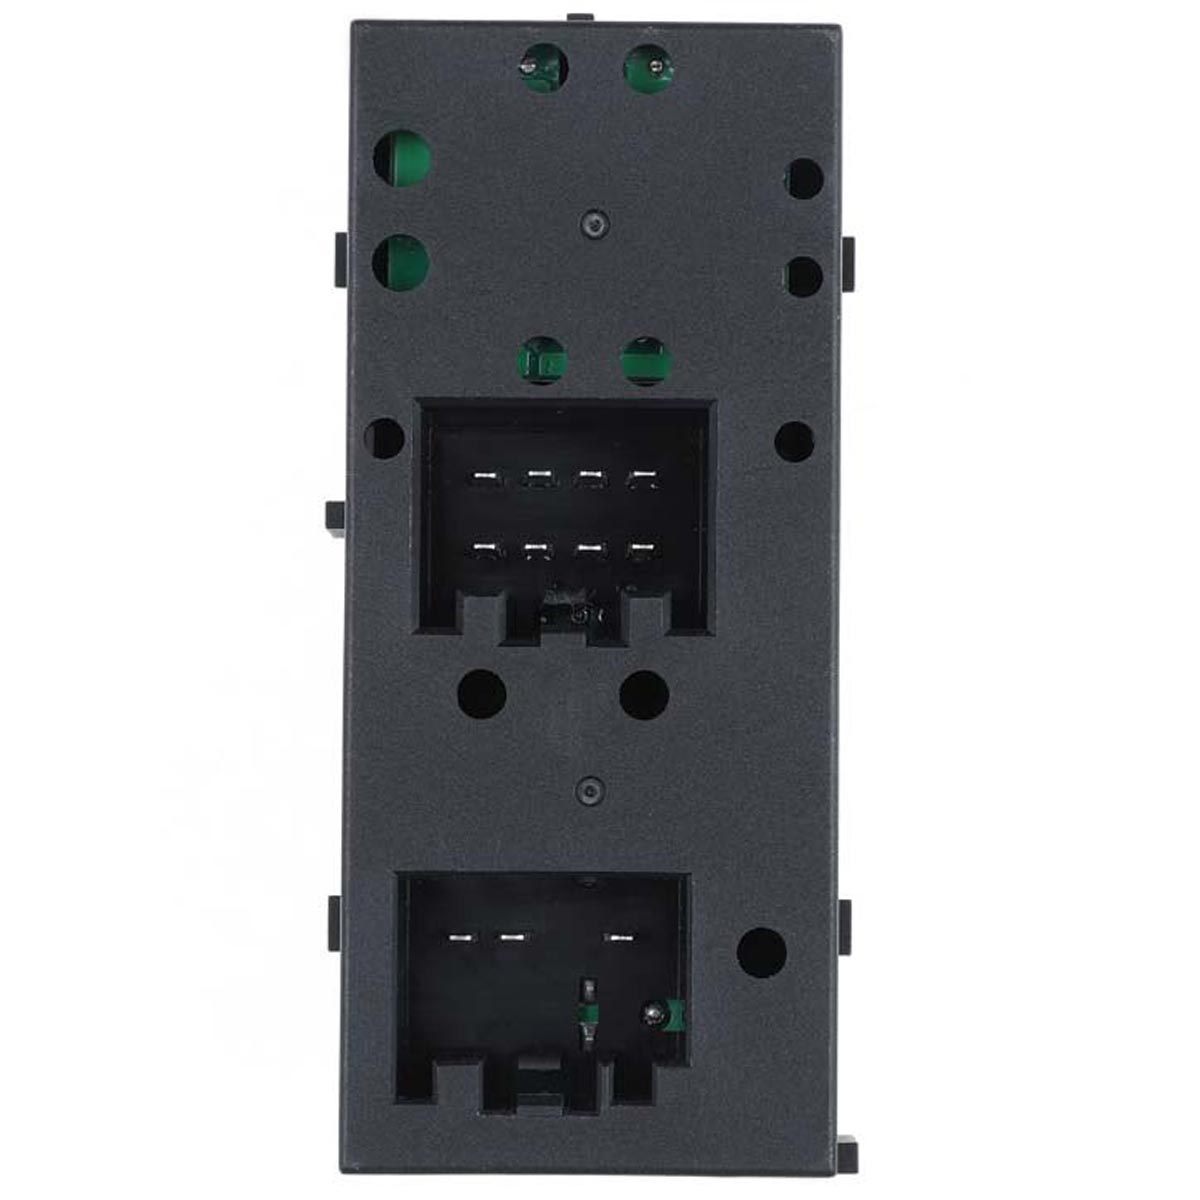 New aftermarket power master window switch for 2006-2008 Lincoln Mark LT